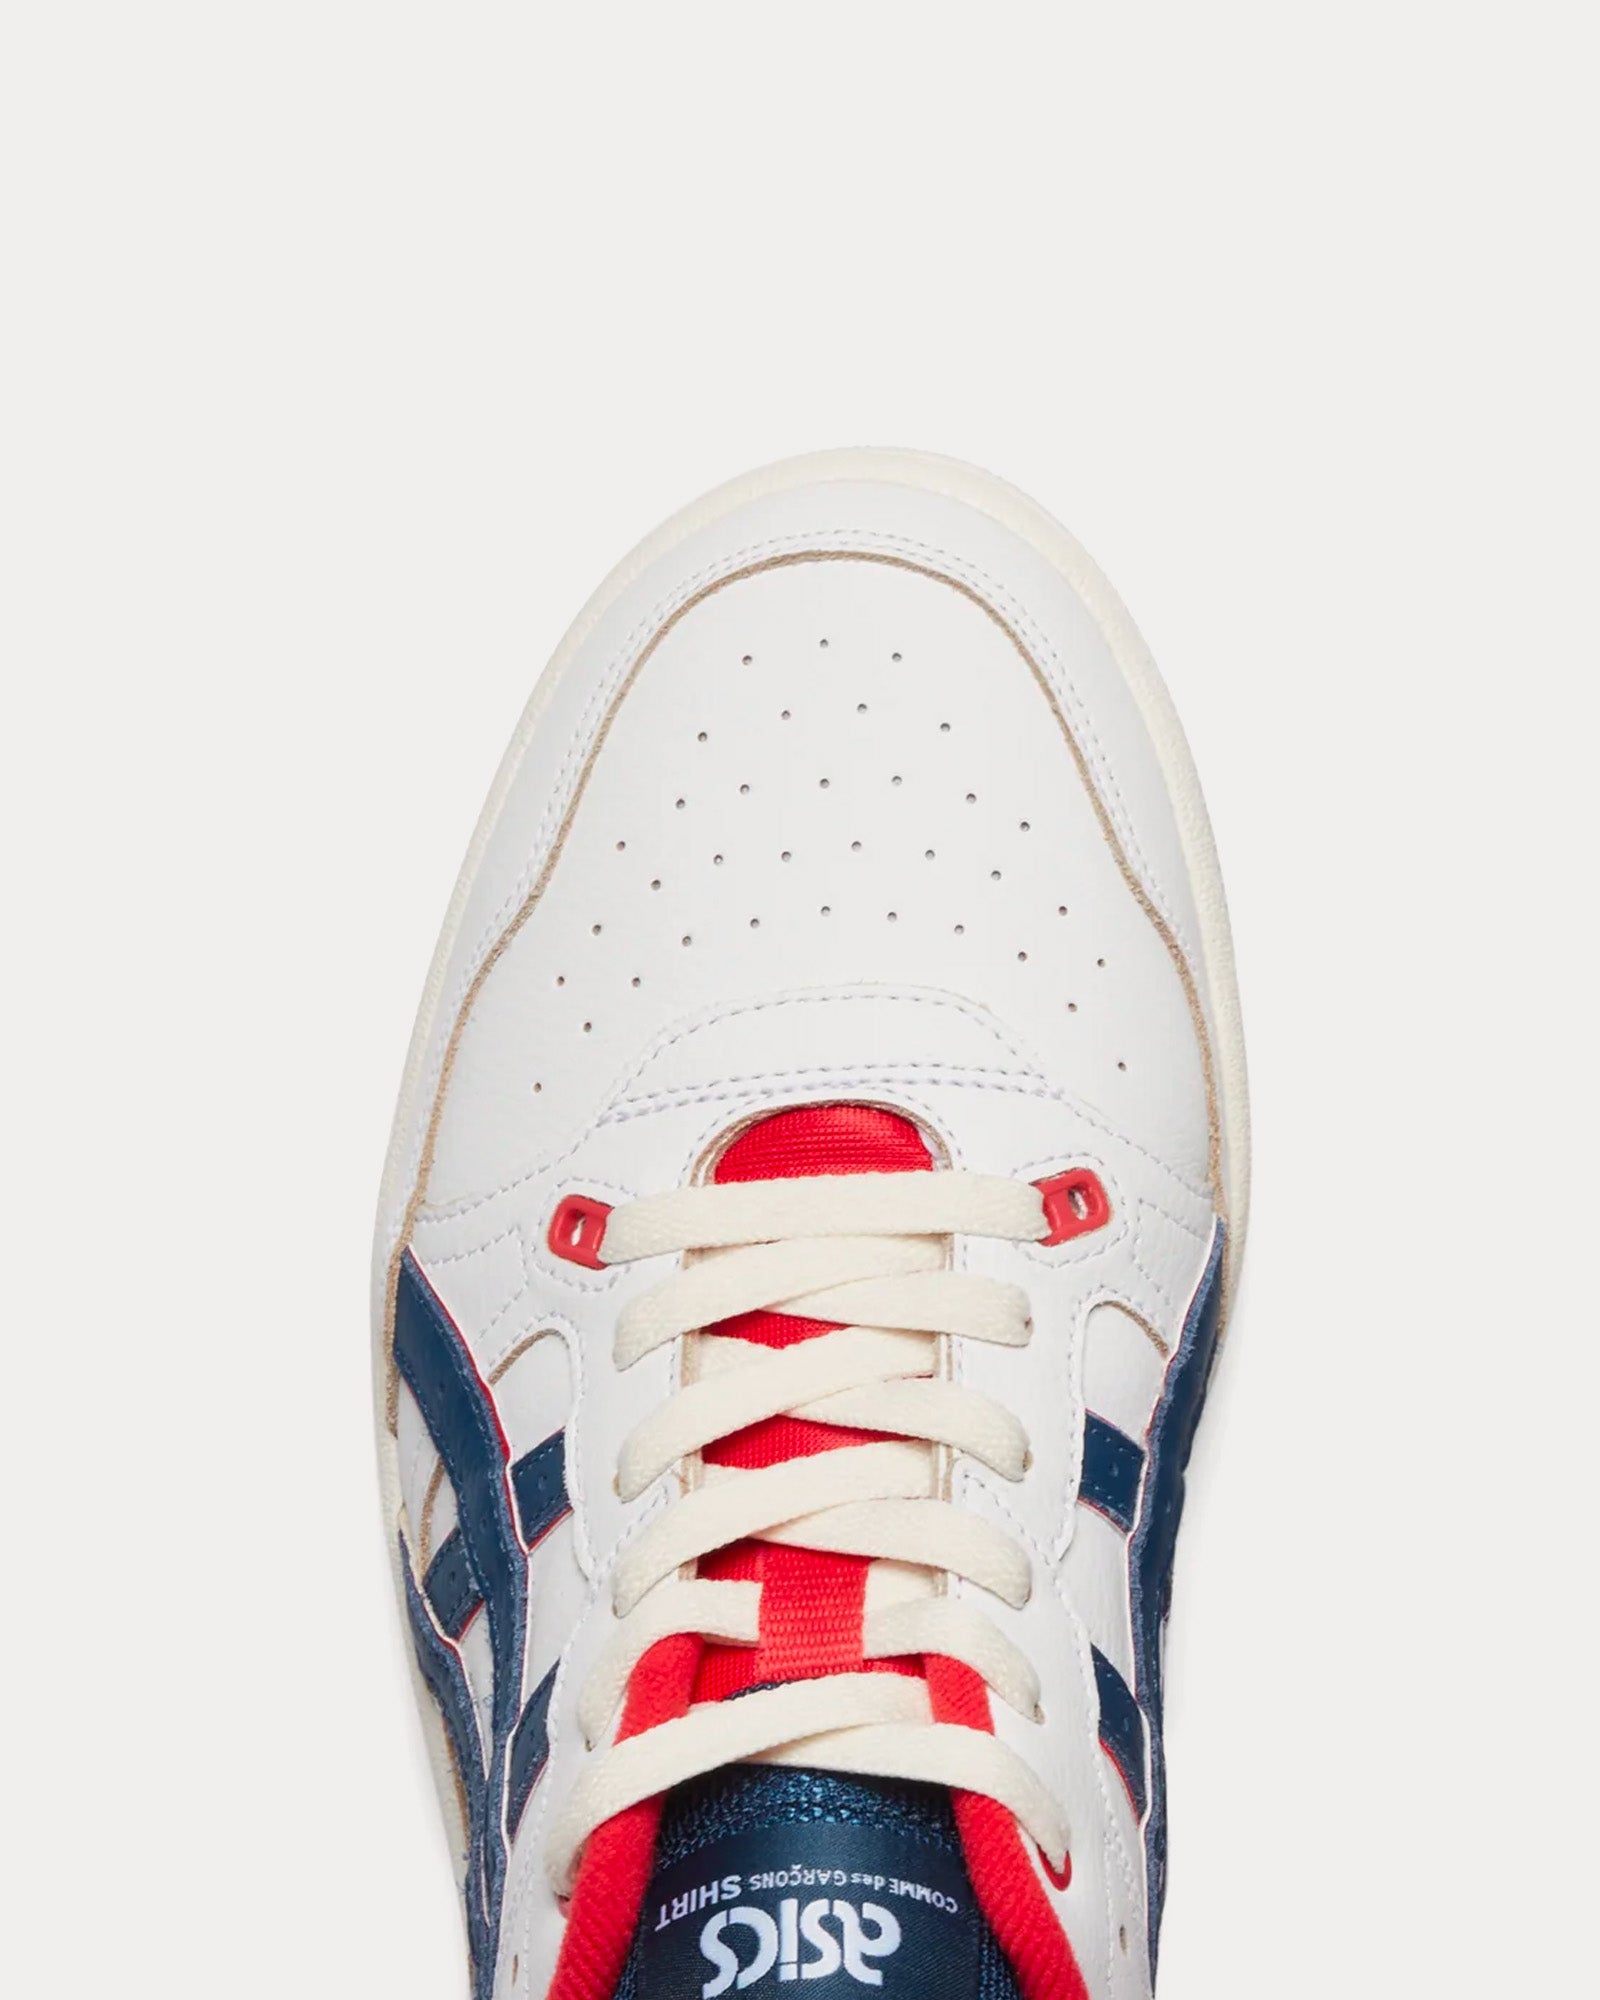 Asics x CDG Shirt - EX89 White / Red / Blue Low Top Sneakers